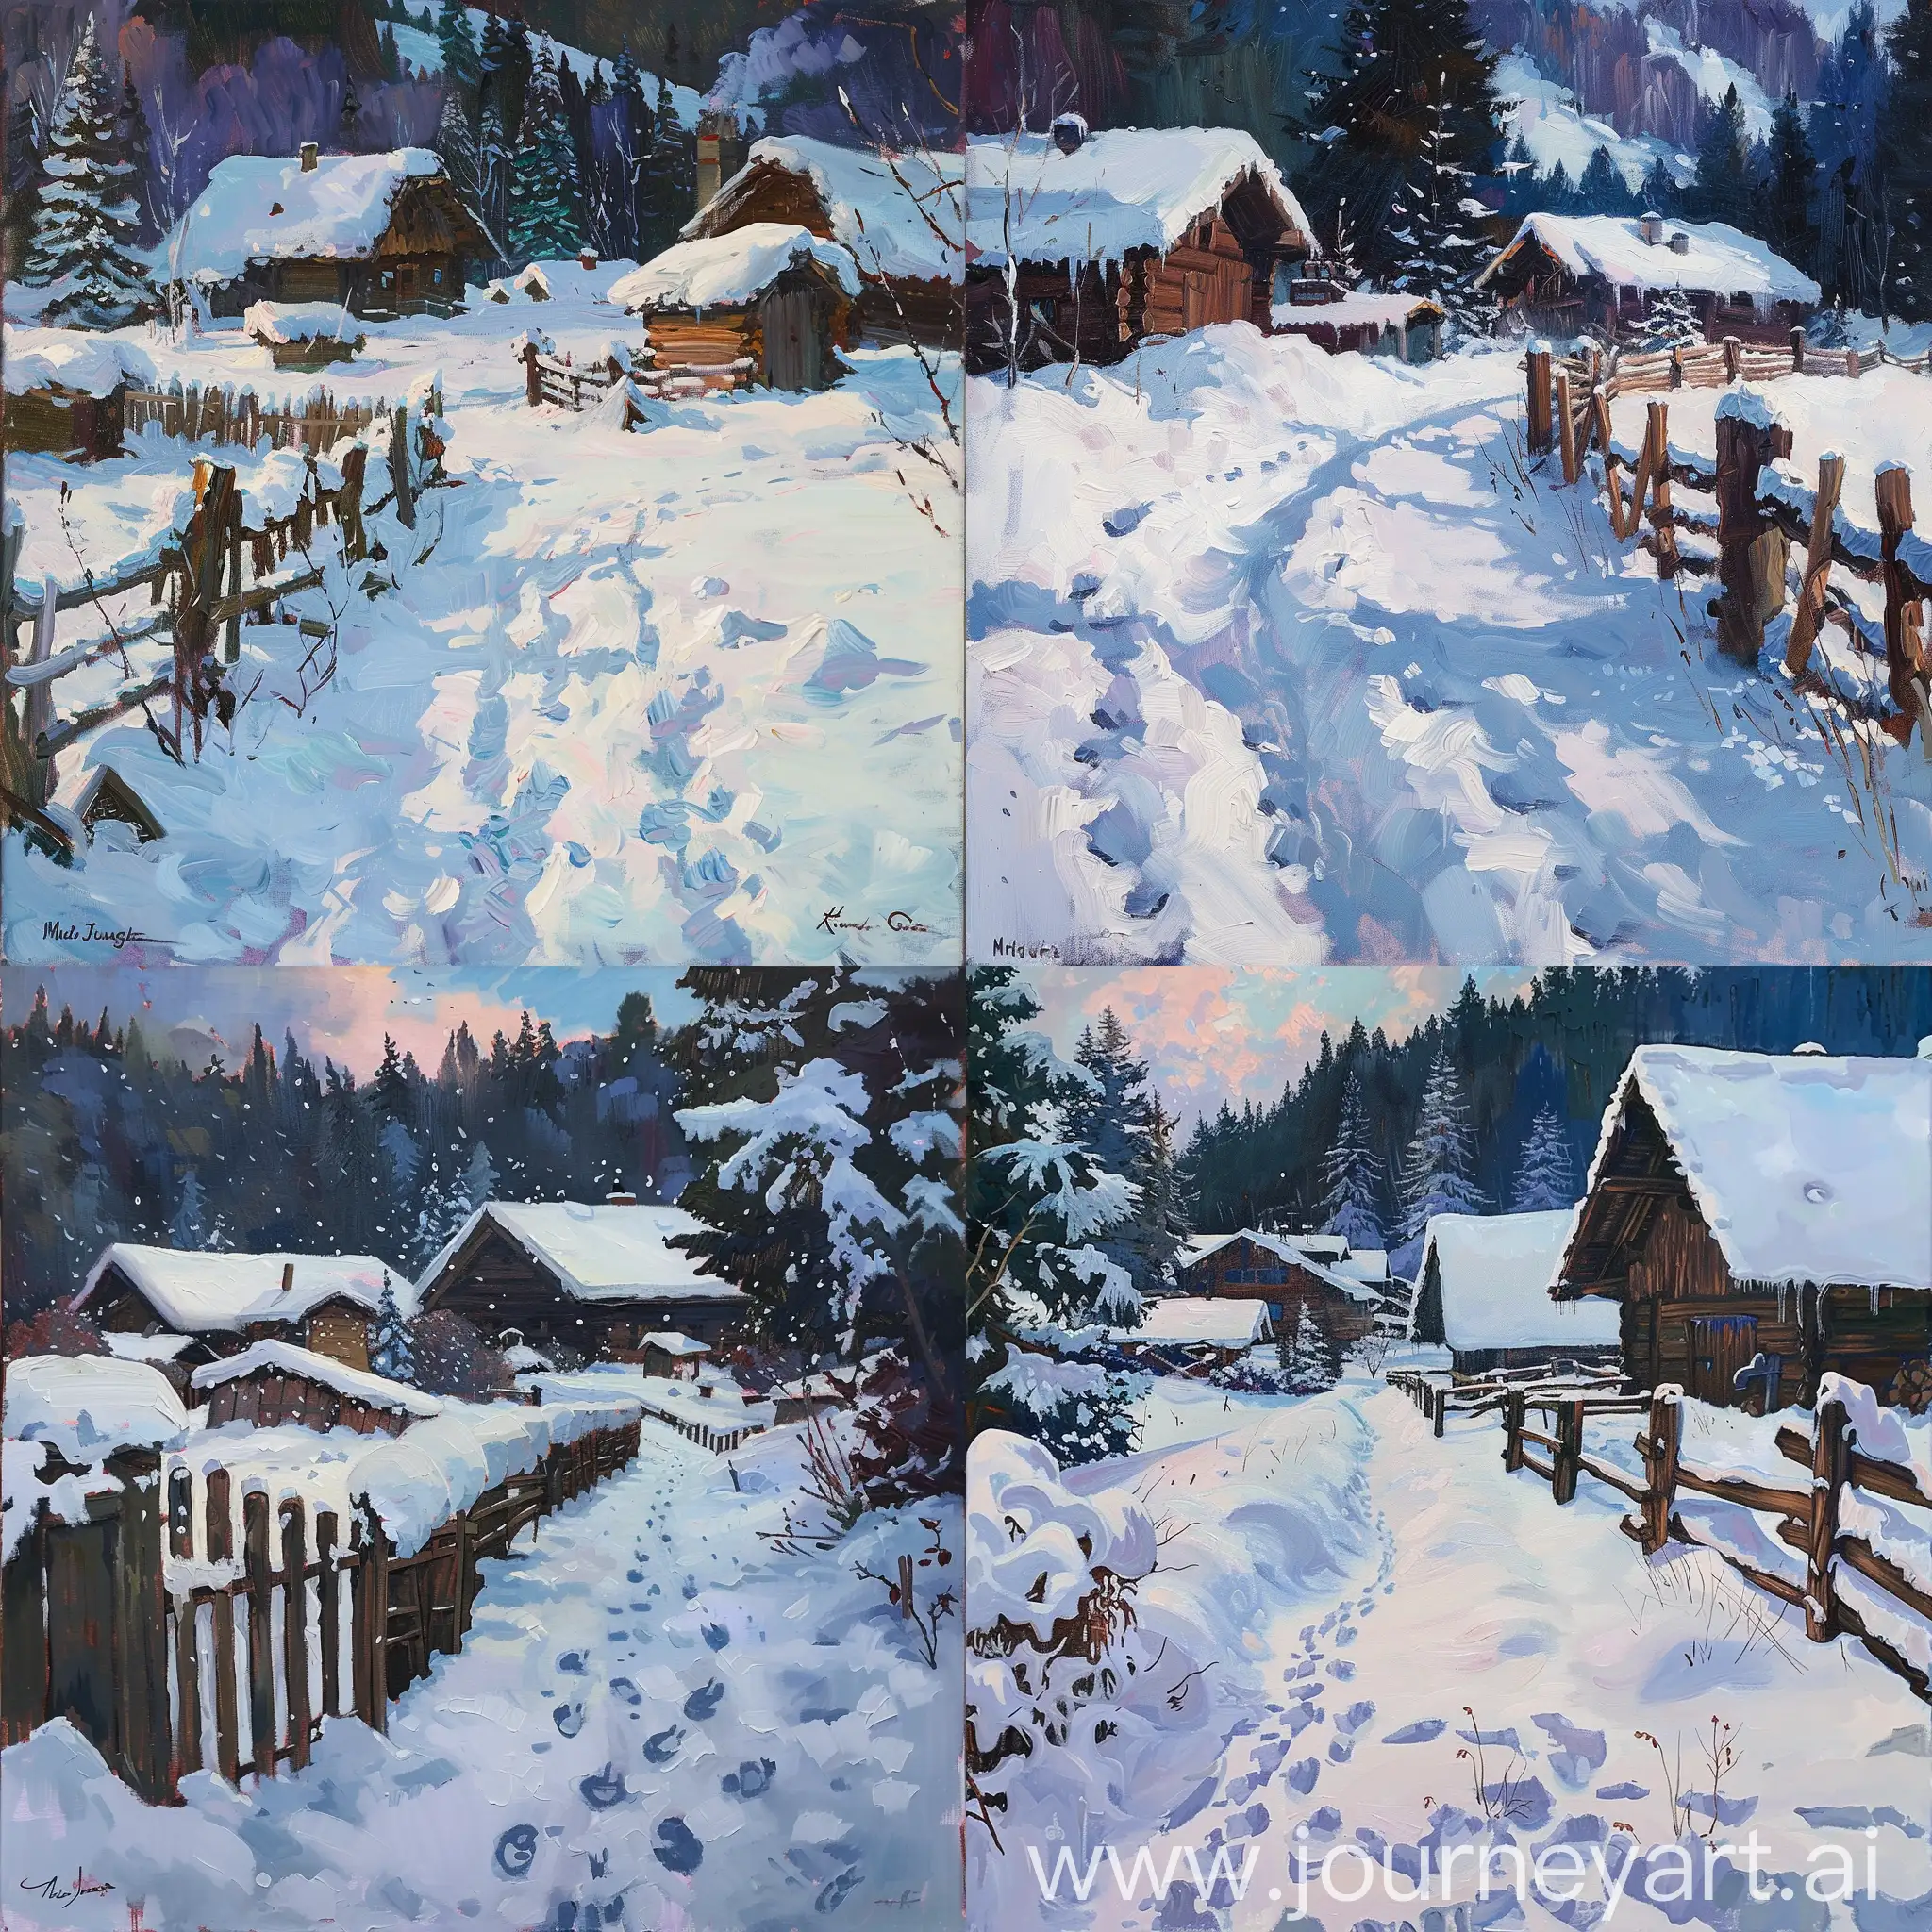 Serene-Winter-Landscape-Painting-with-Wooden-Chalets-and-Snowy-Forest